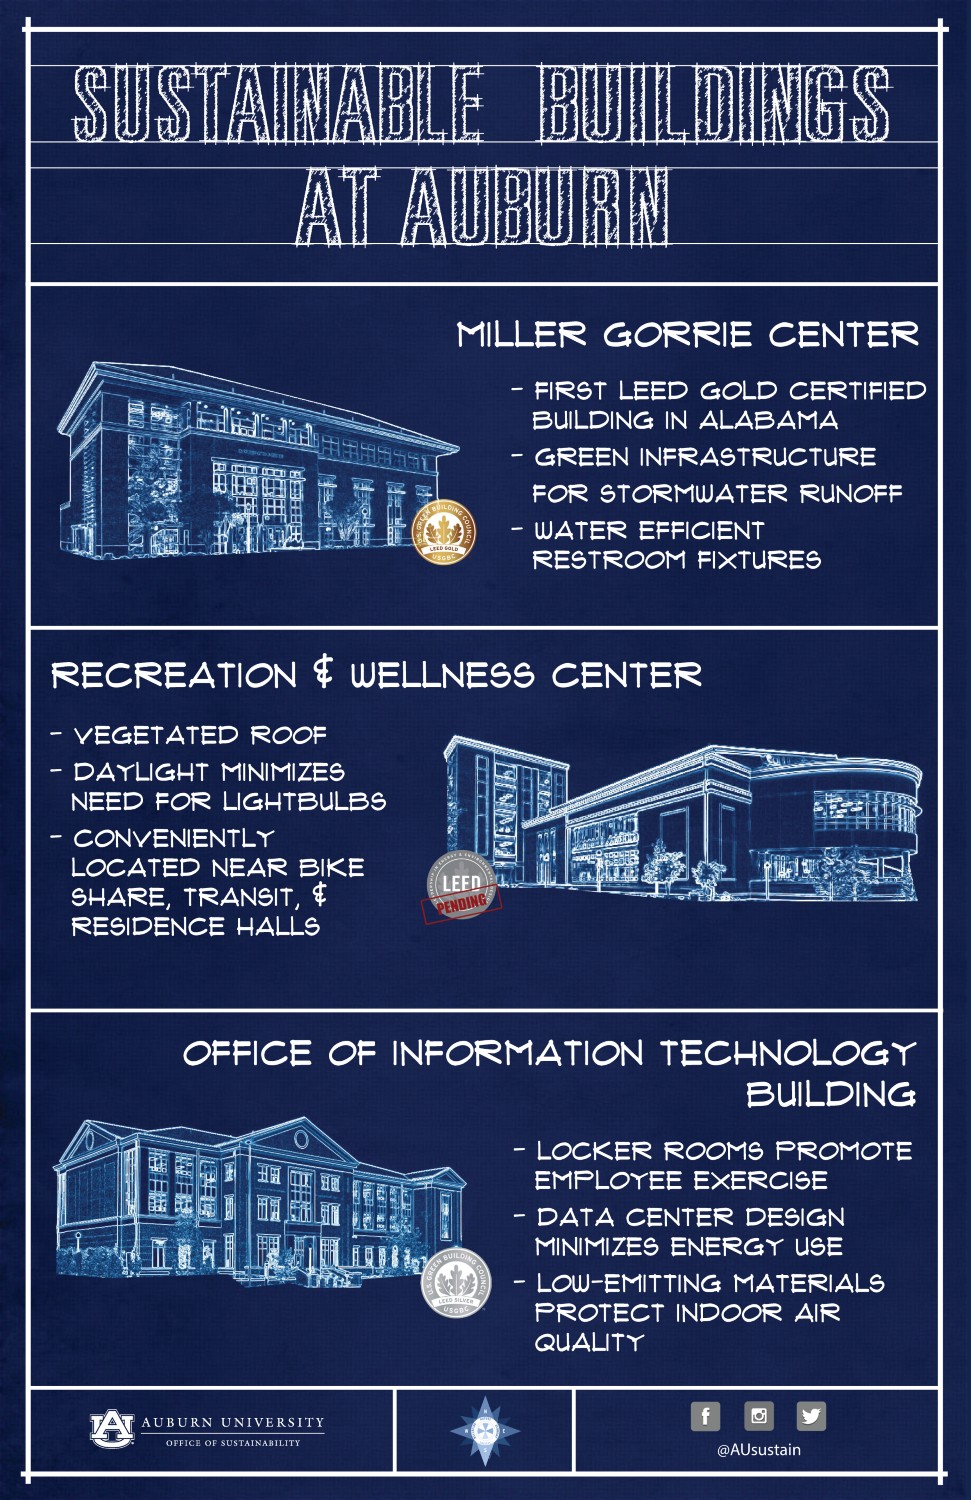 Graphic listing LEED-certified buildings on Auburn's Campus. Buildings mentioned include Miller Gorrie Center, Recreation & Wellness Center, and Office of Information Technology Building.